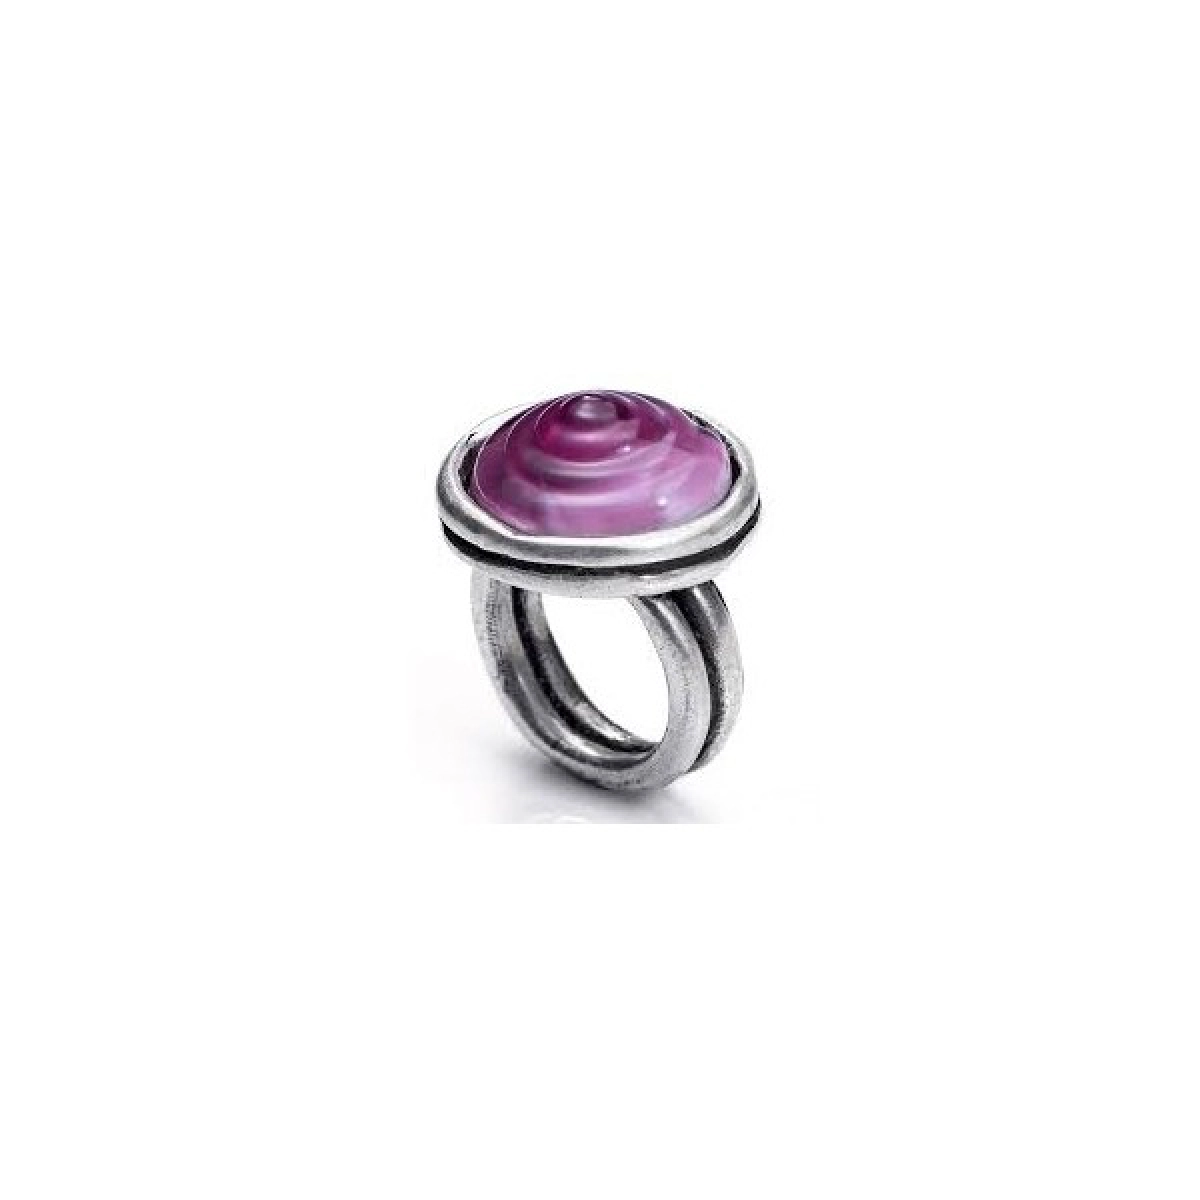 VICEROY MURANO GLASS RING 1004A01417